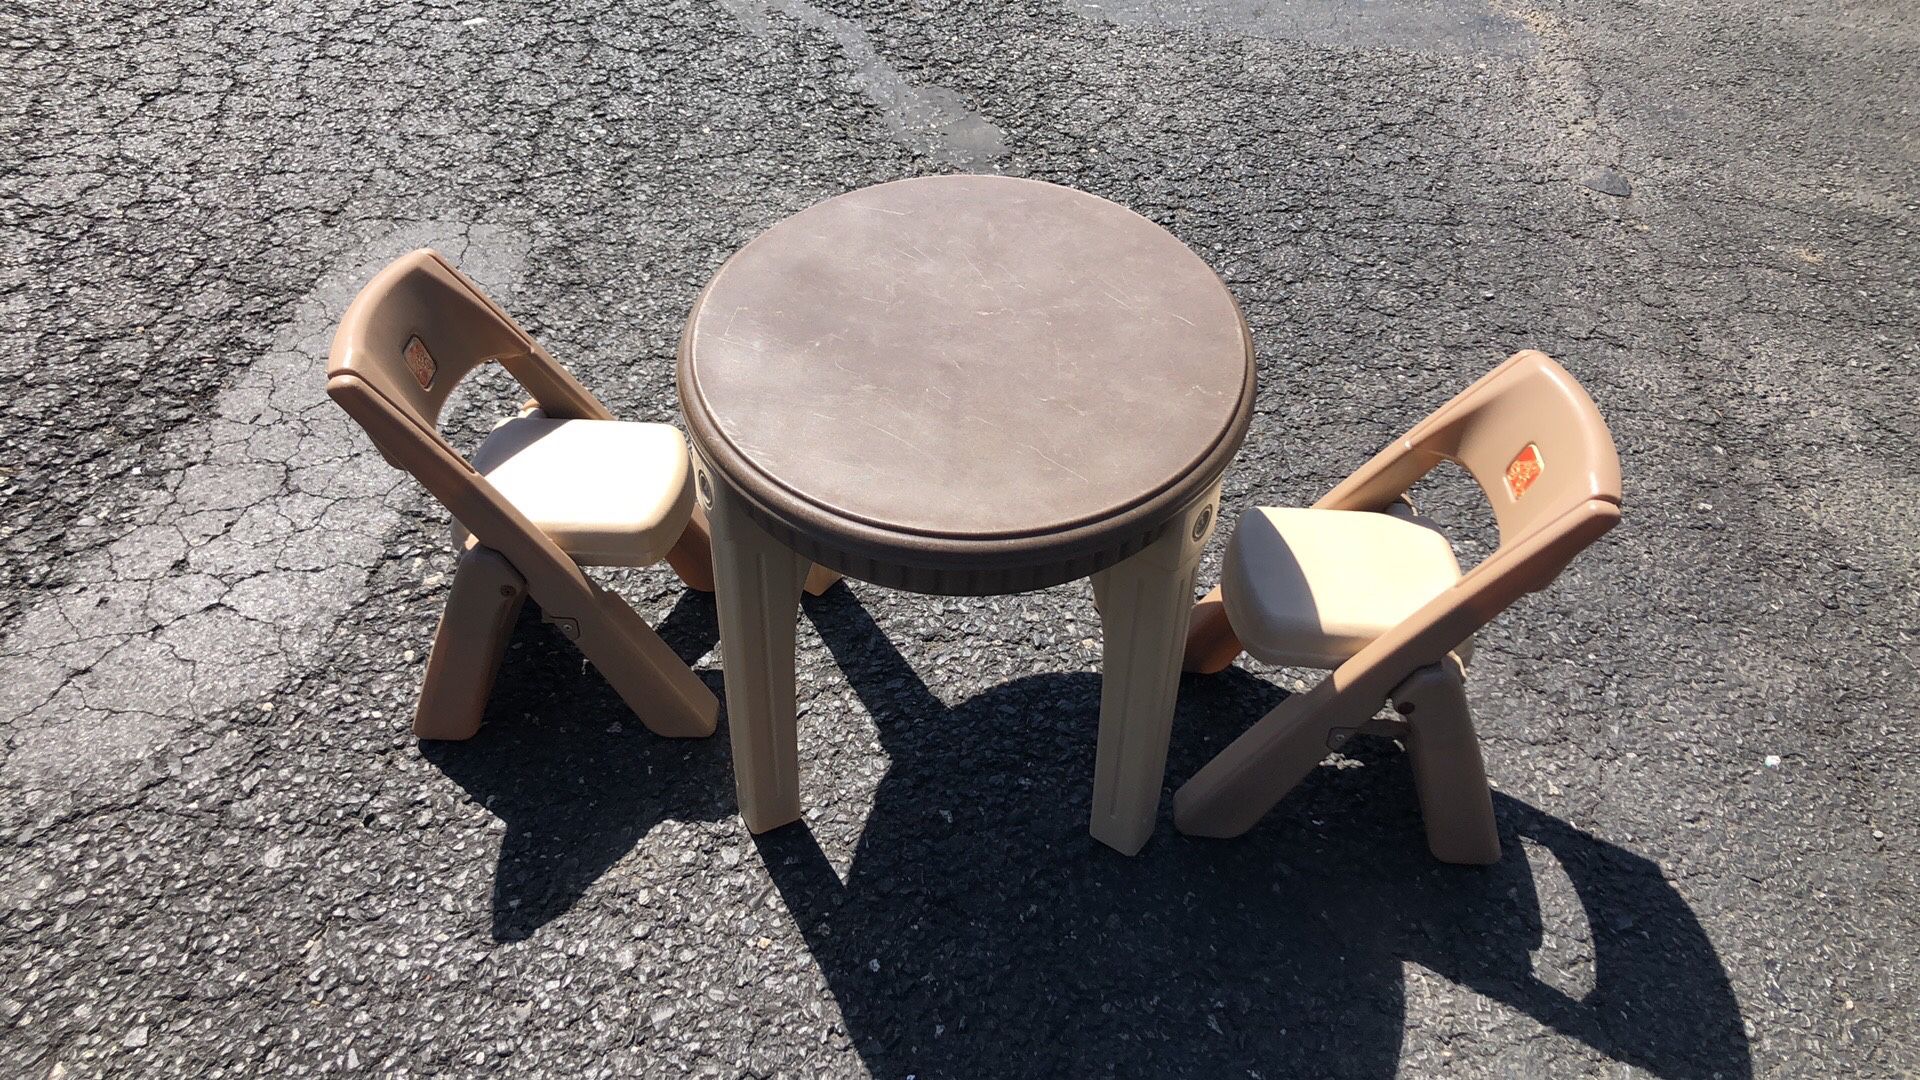 Plastic Kids Table with two folding chairs